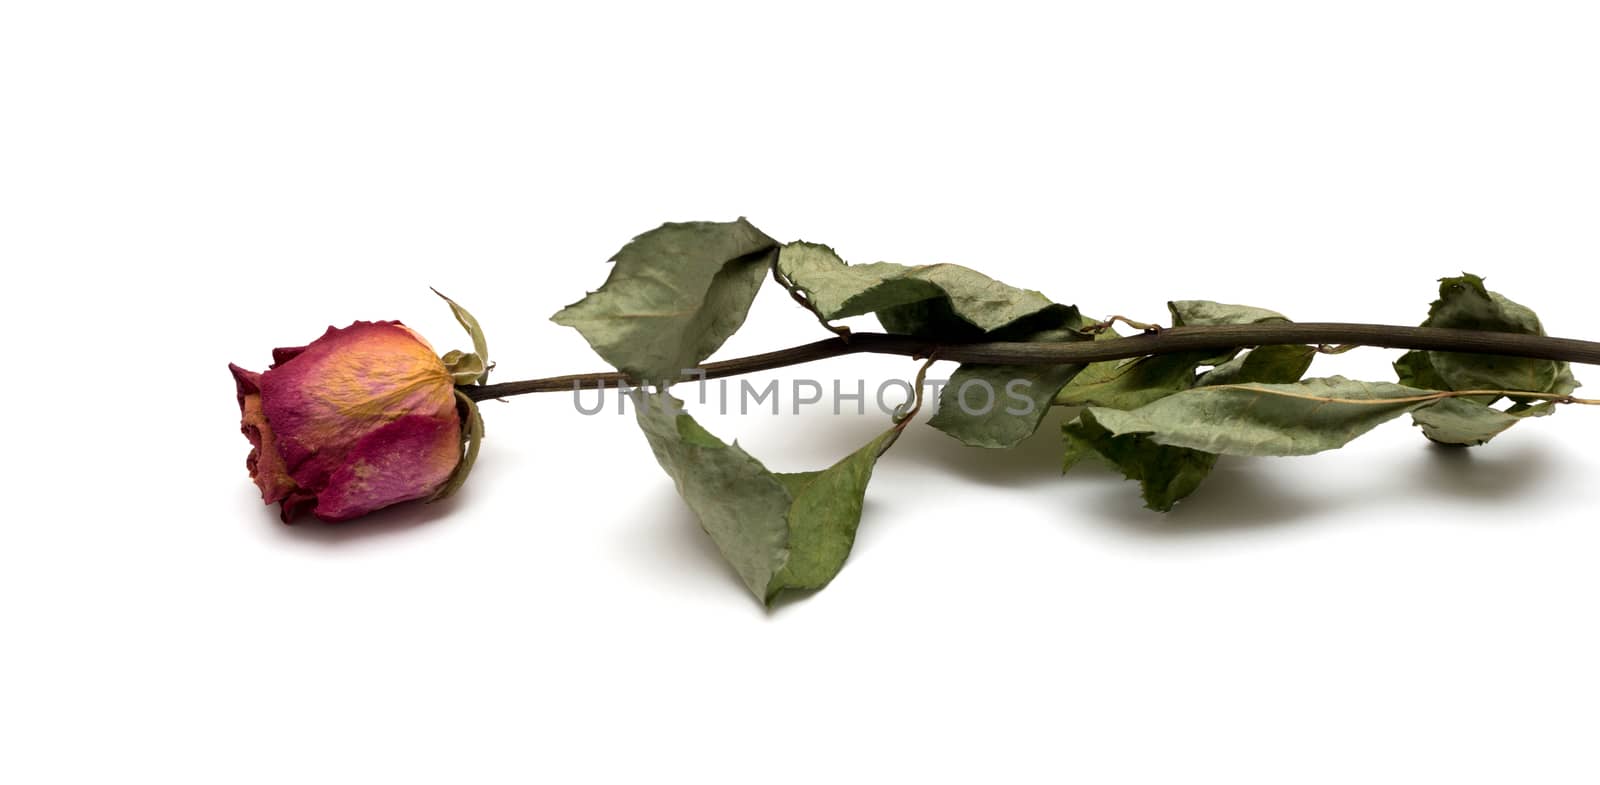 Dried roses isolated on white